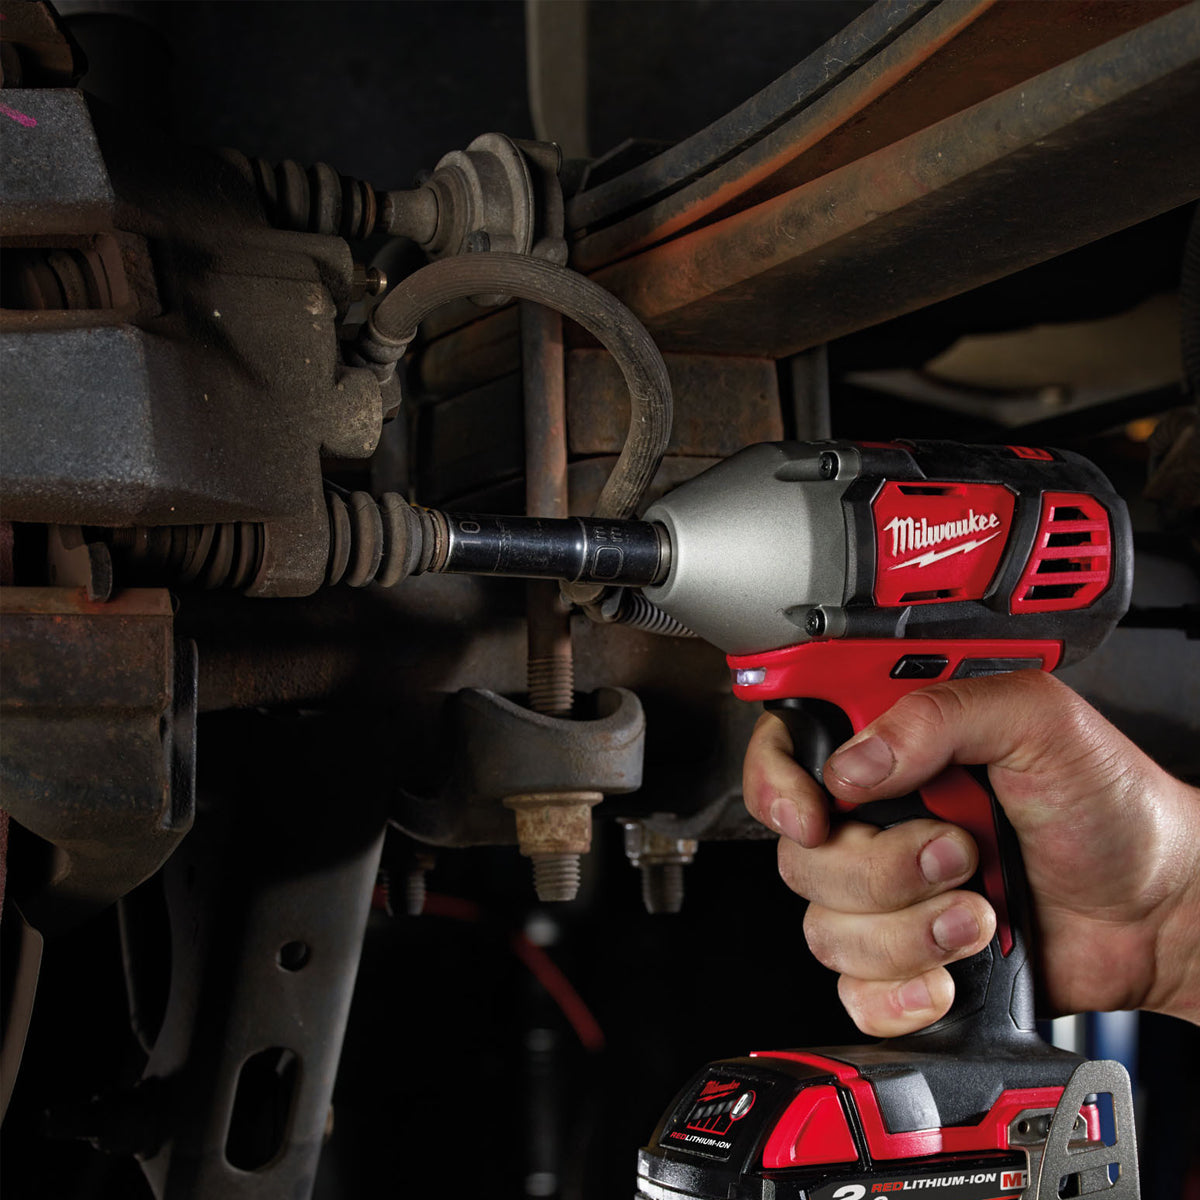 Milwaukee M18BIW38-0 18V Compact 3/8In Impact Wrench with 1 x 5.0Ah Battery & Fast Charger